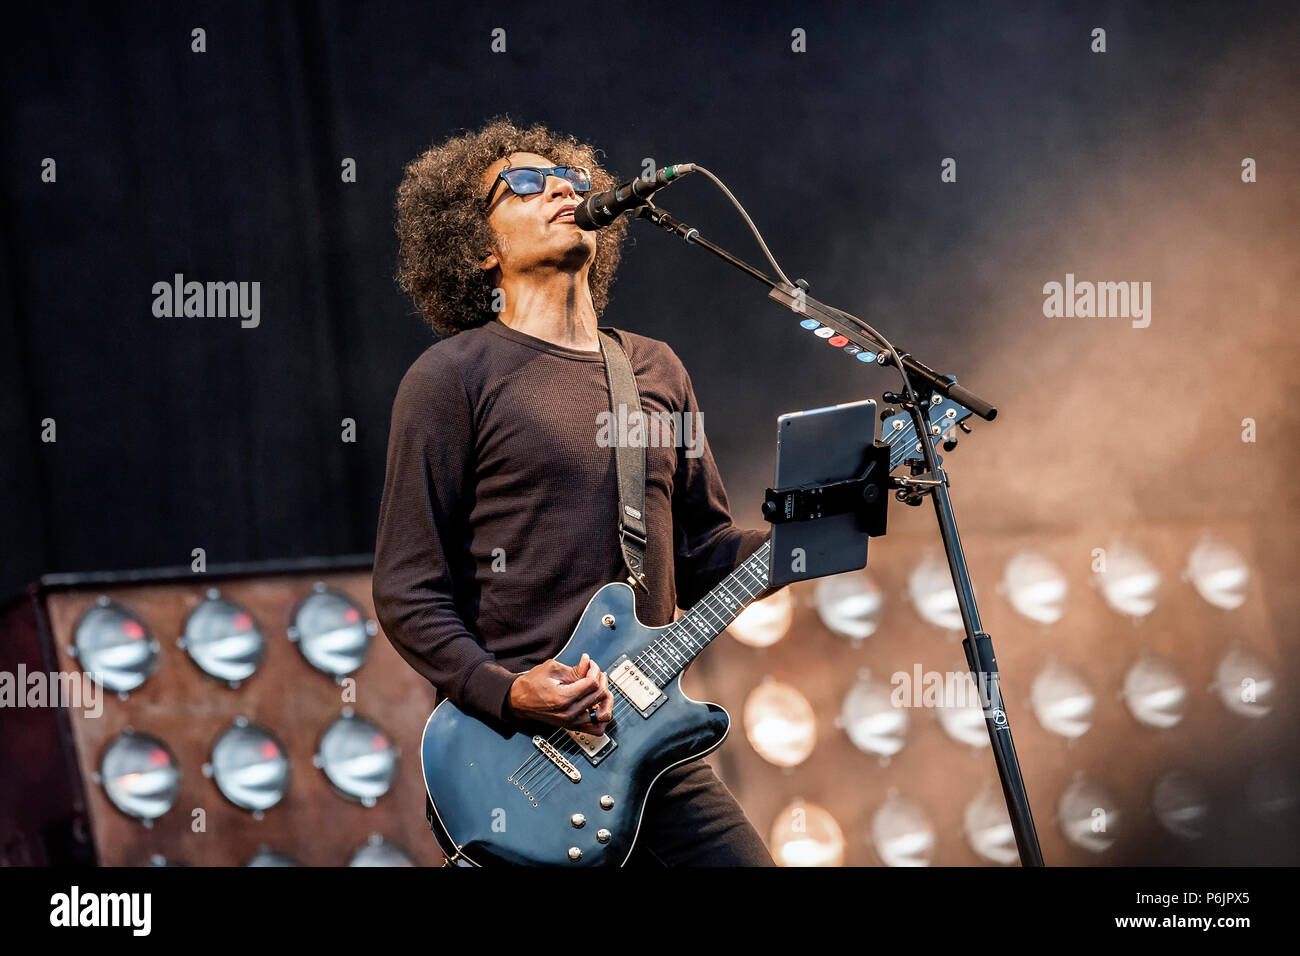 Norway, Halden - June 21, 2018. The American rock band Alice in Chains performs a live concert during the Norwegian music metal festival Tons of Rock 2018 in Halden. Here singer and guitarist William DuVall is seen live on stage. (Photo credit: Gonzales Photo - Terje Dokken). Stock Photo